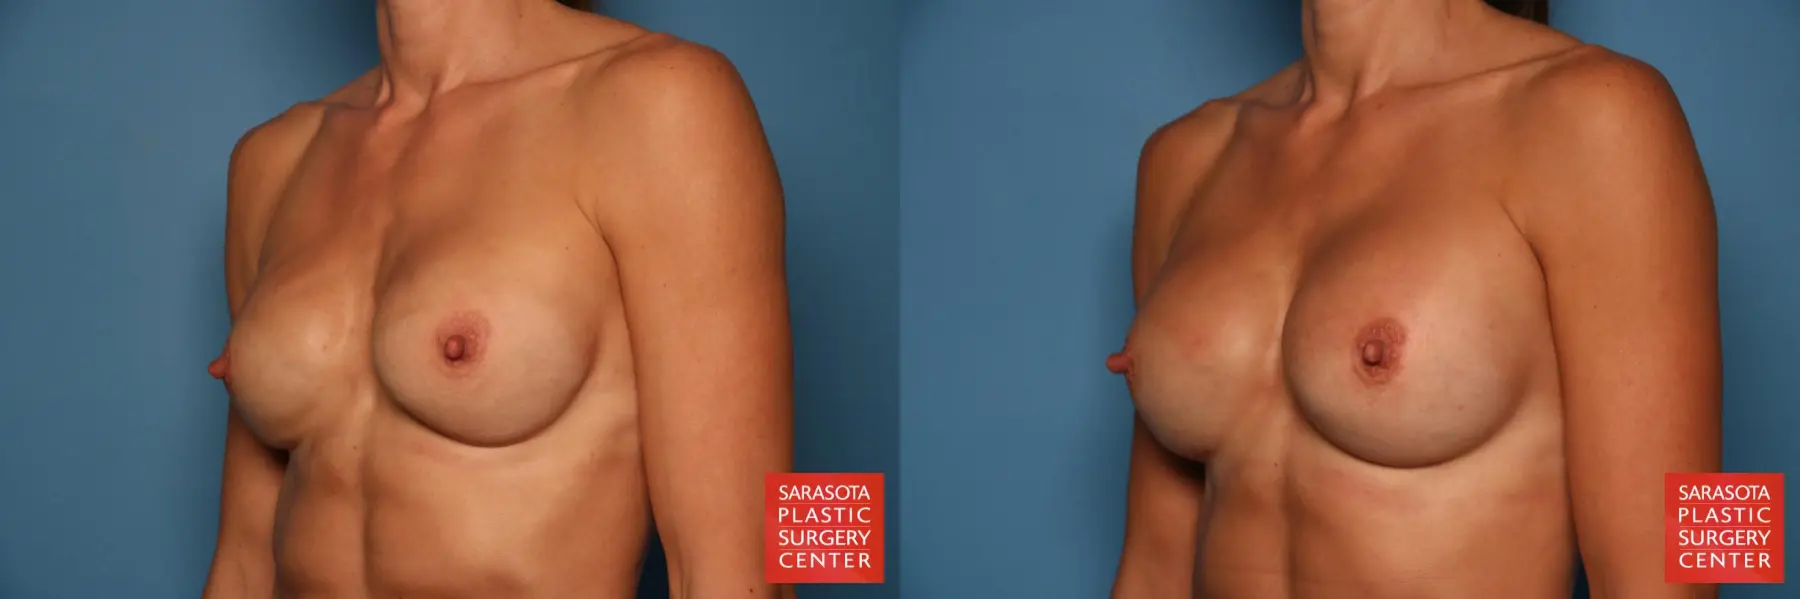 Breast Implant Exchange: Patient 1 - Before and After 2